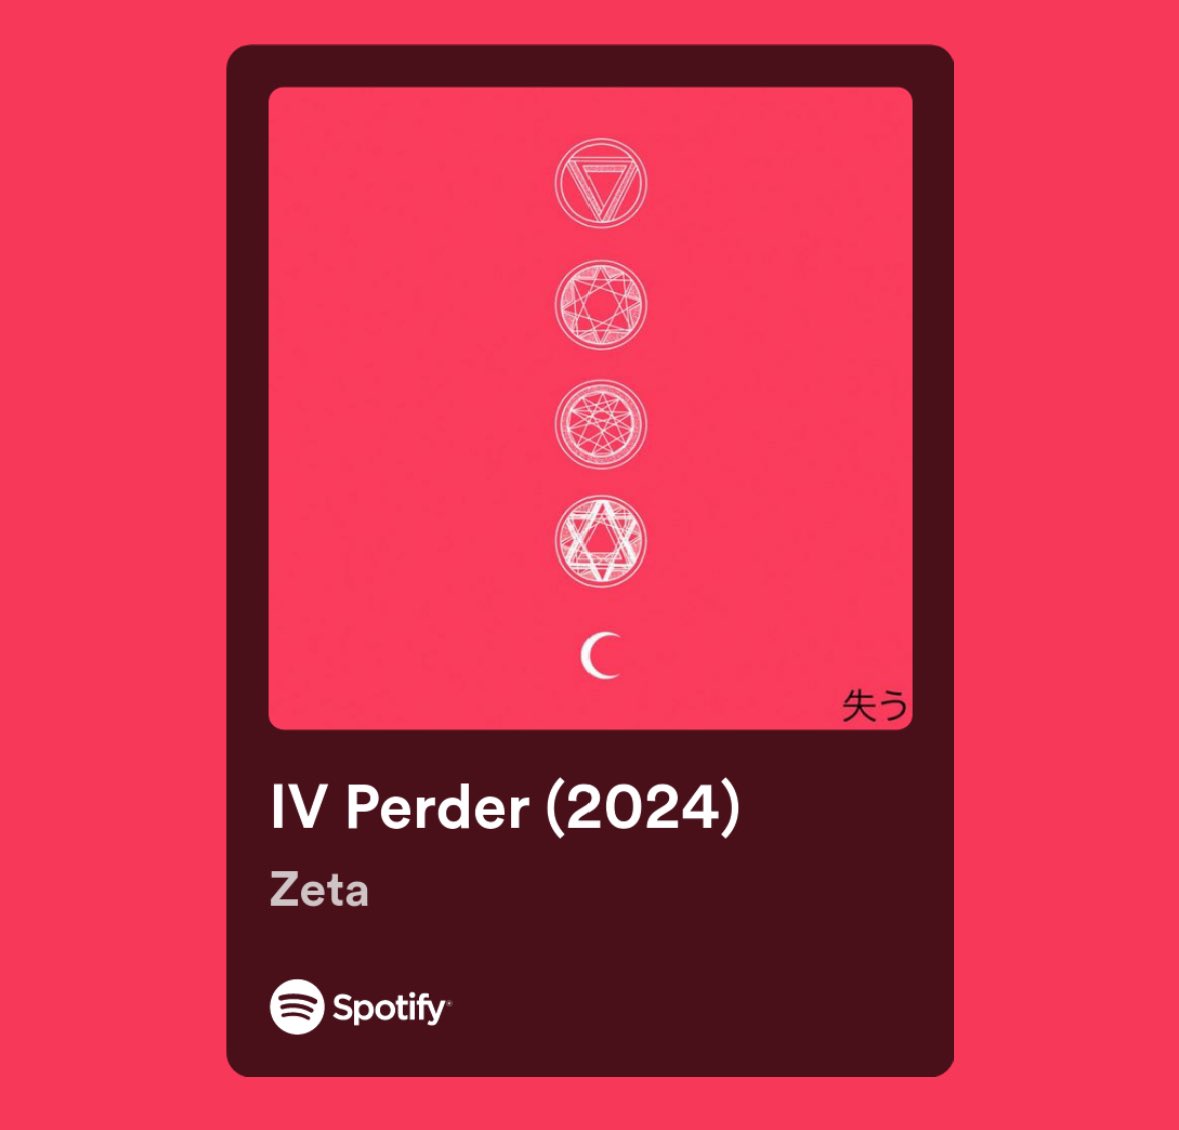 “IV Perder (2024)” is now available in all platforms ✨ tr.ee/Perder full album drops April 18th in Orlando, FL at Conduit Produced, mix and mastered by Raul “Riff” Cuellar Full video available in YT filmed and edited by Alana Wool, Sam Killinger & Andy Magill